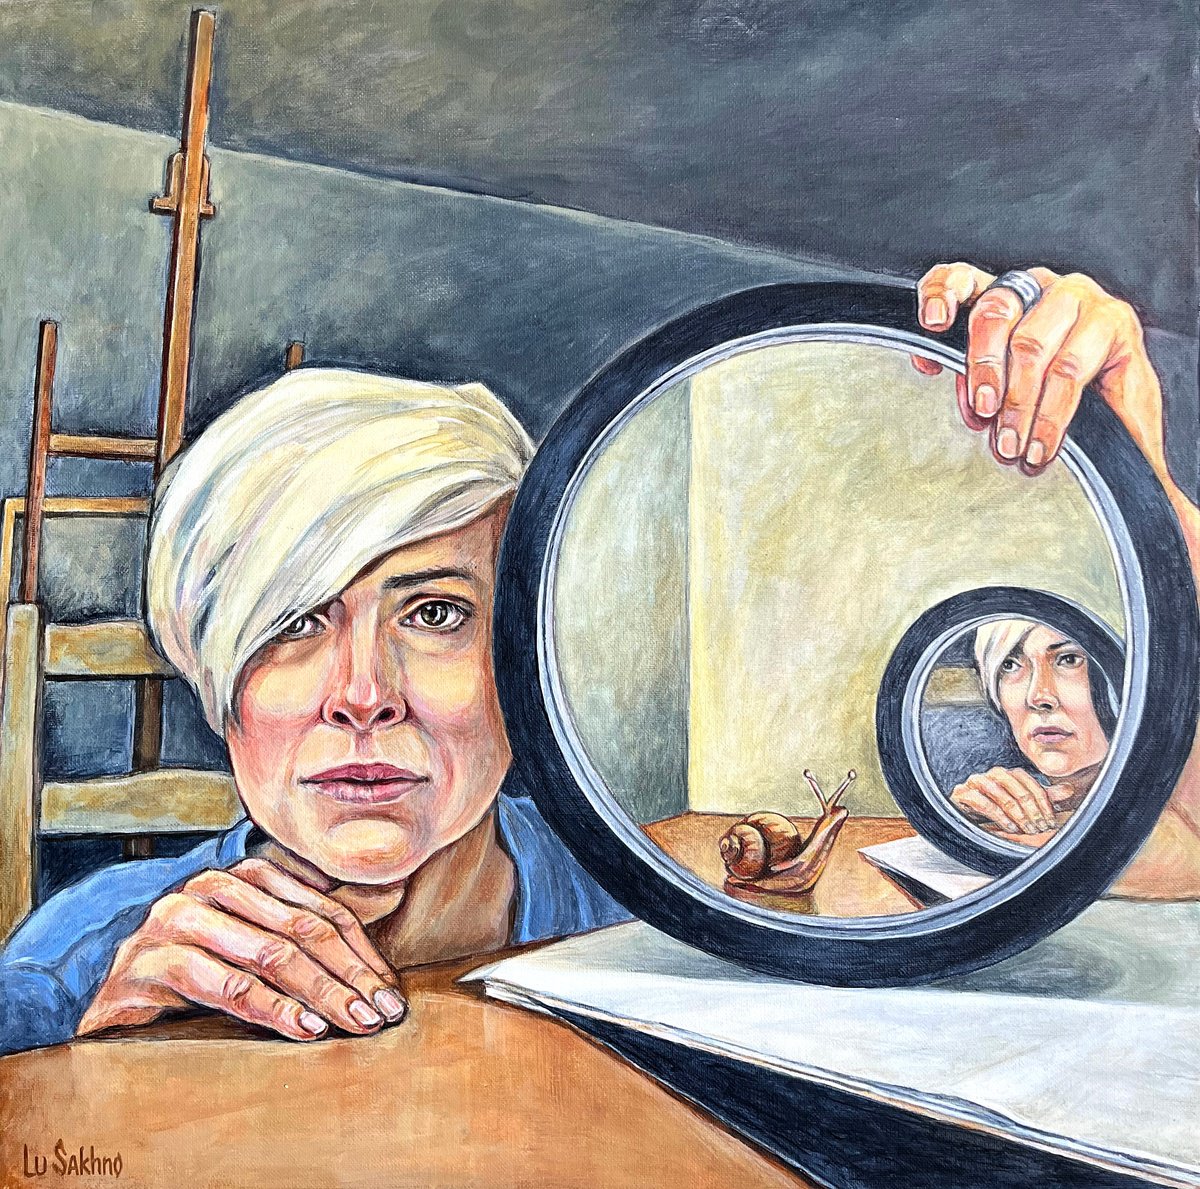 Self-portrait with a mirror by Lu Sakhno